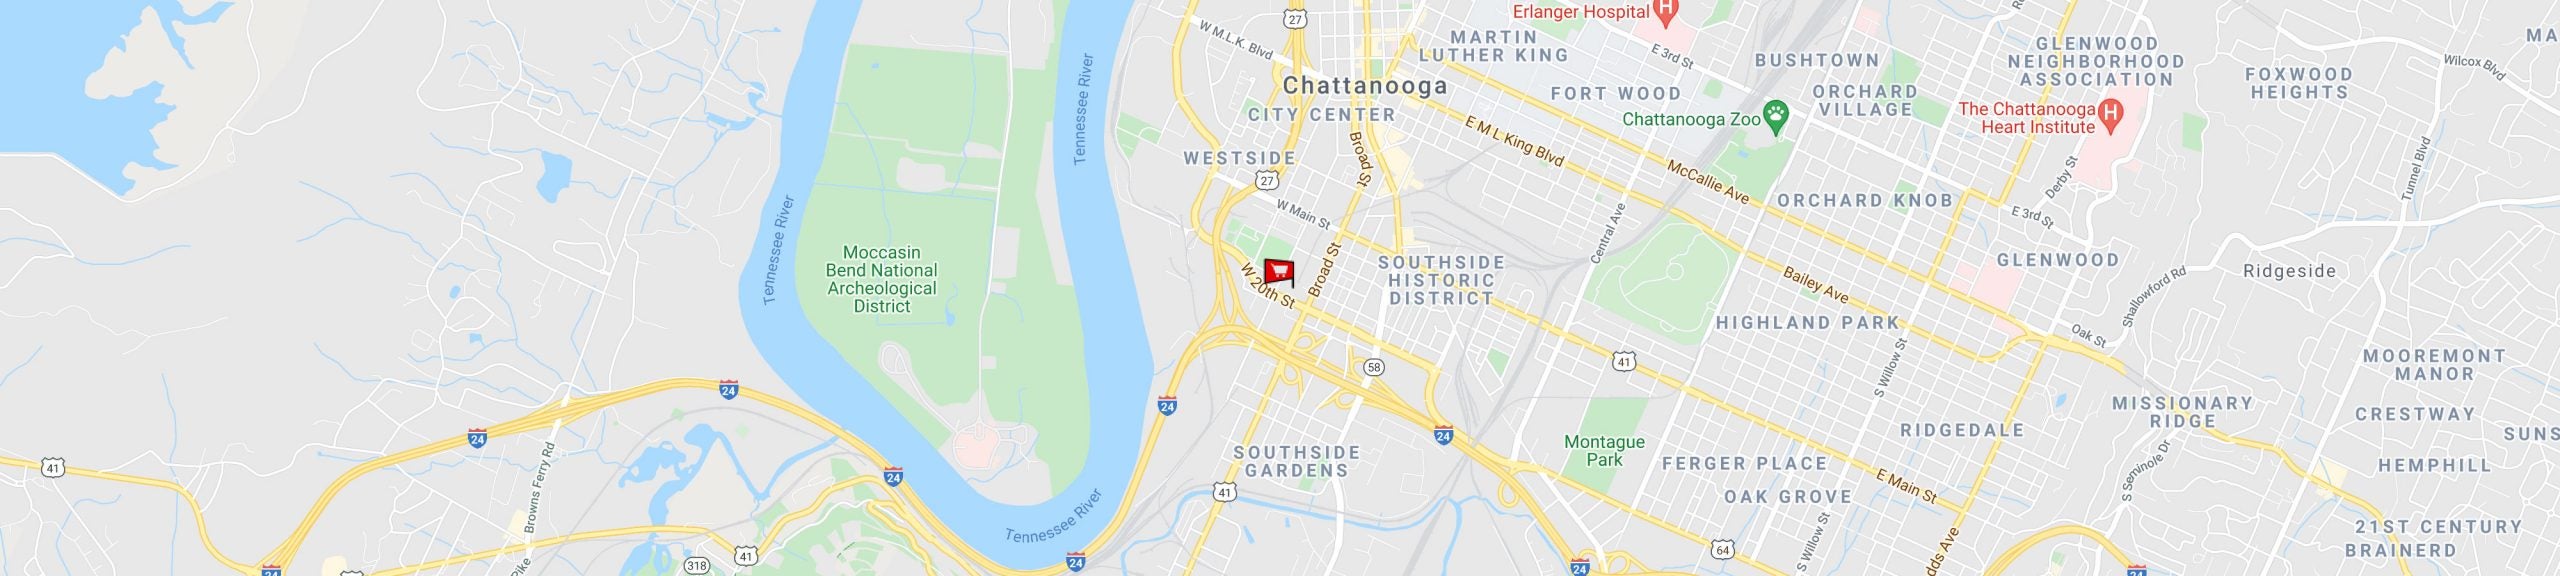 Chattanooga Store Map